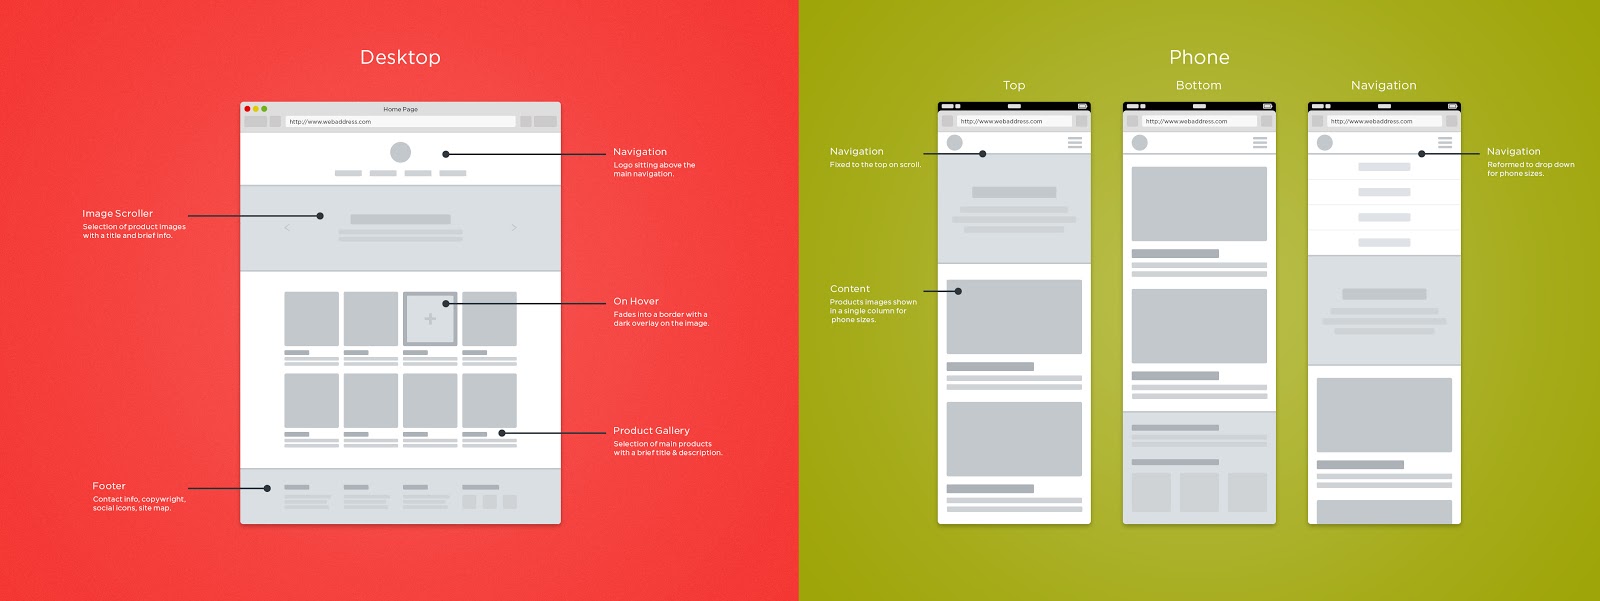 Responsive wireframe templates for a desktop and mobile device.